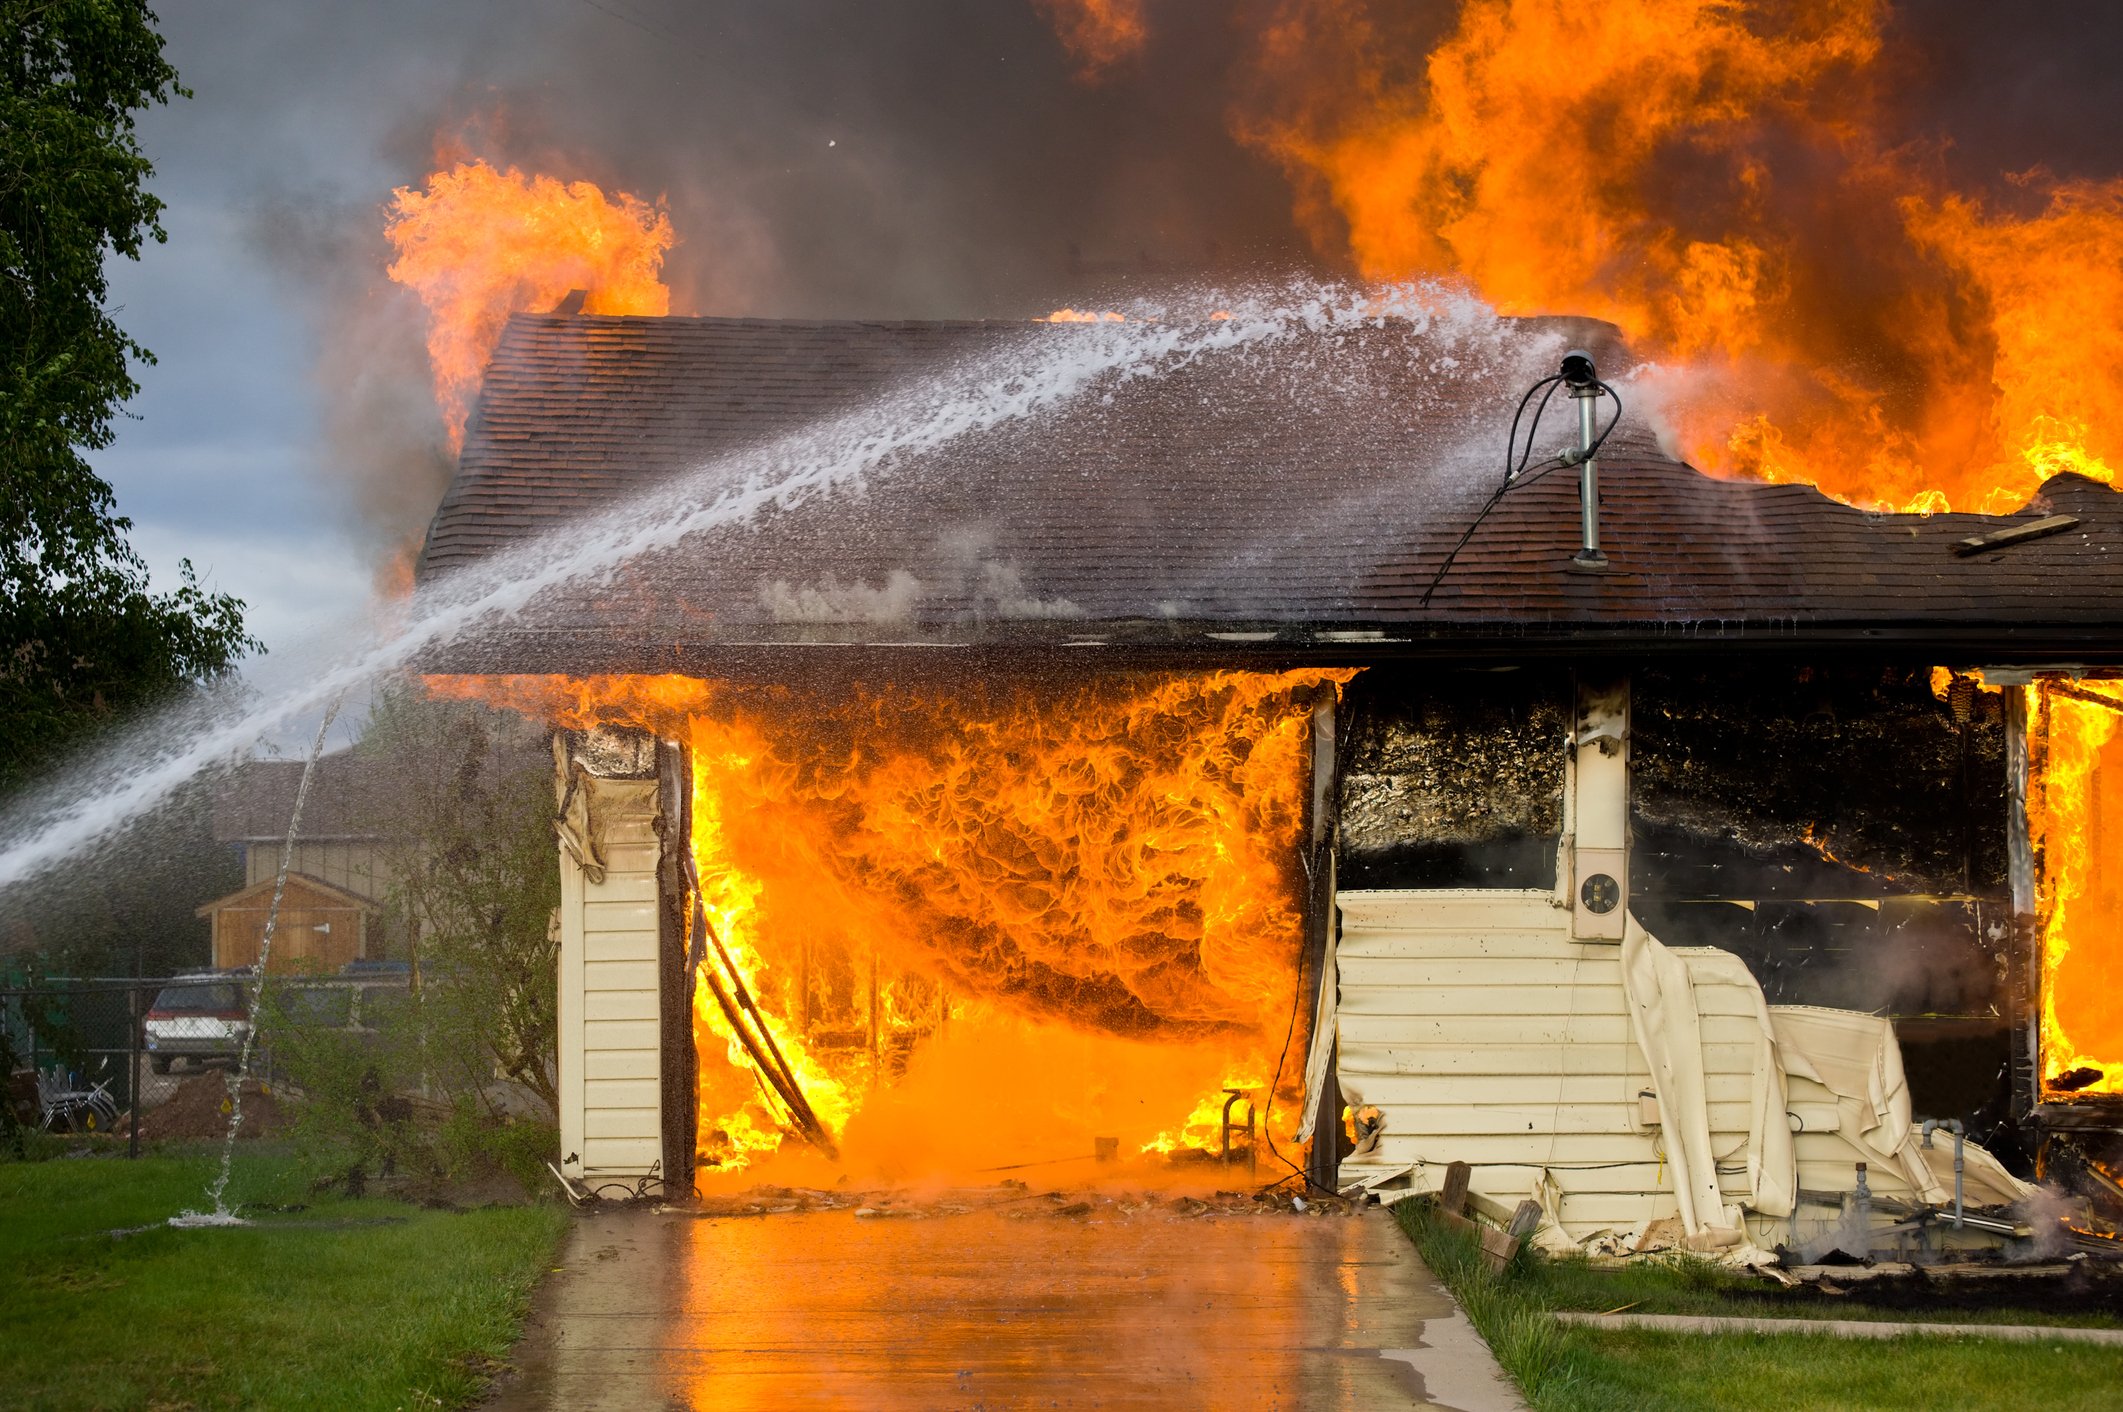 Checking for proper fire protection between the garage and home